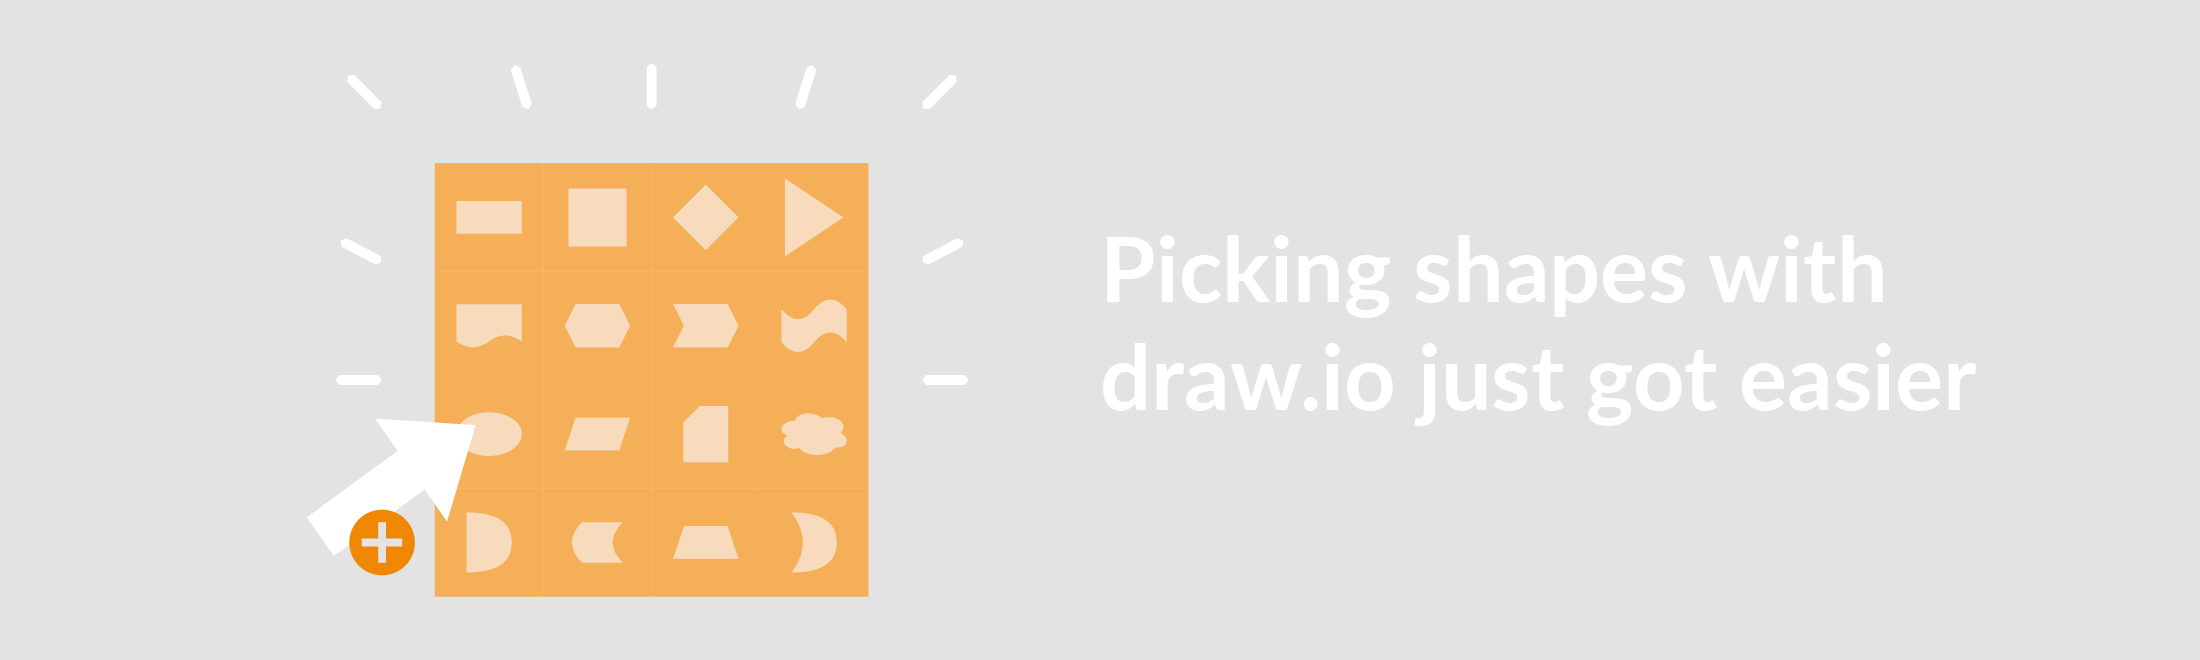 New feature: A shape picker menu for draw.io